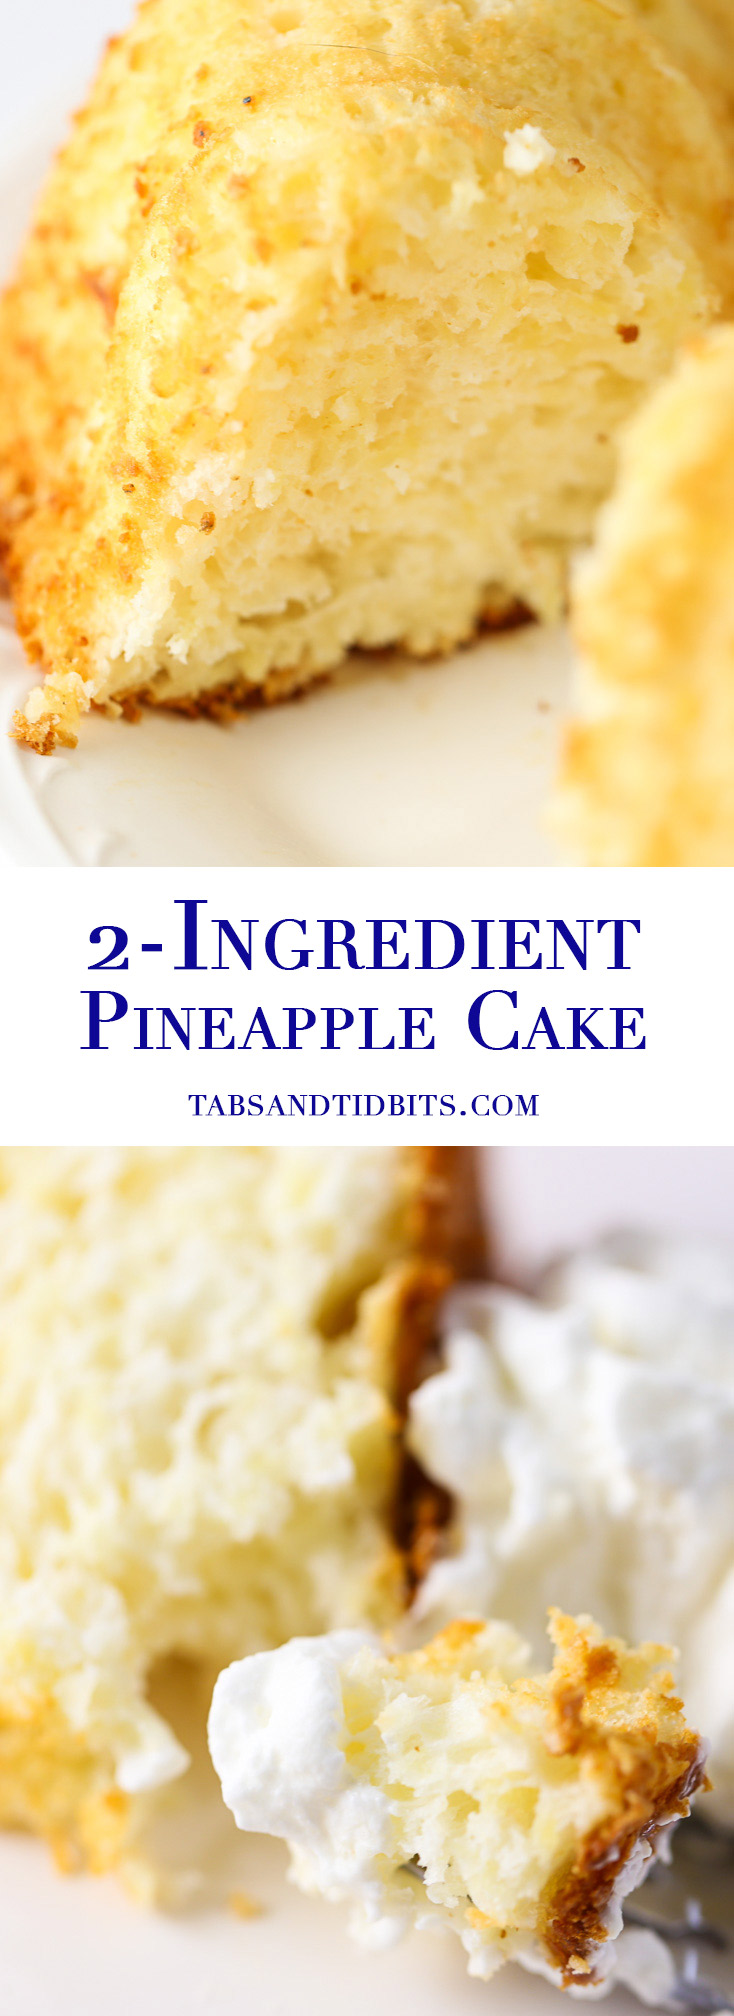 Two Ingredient Pineapple Cake - Just two ingredients create this simple, light, and sweet dessert!